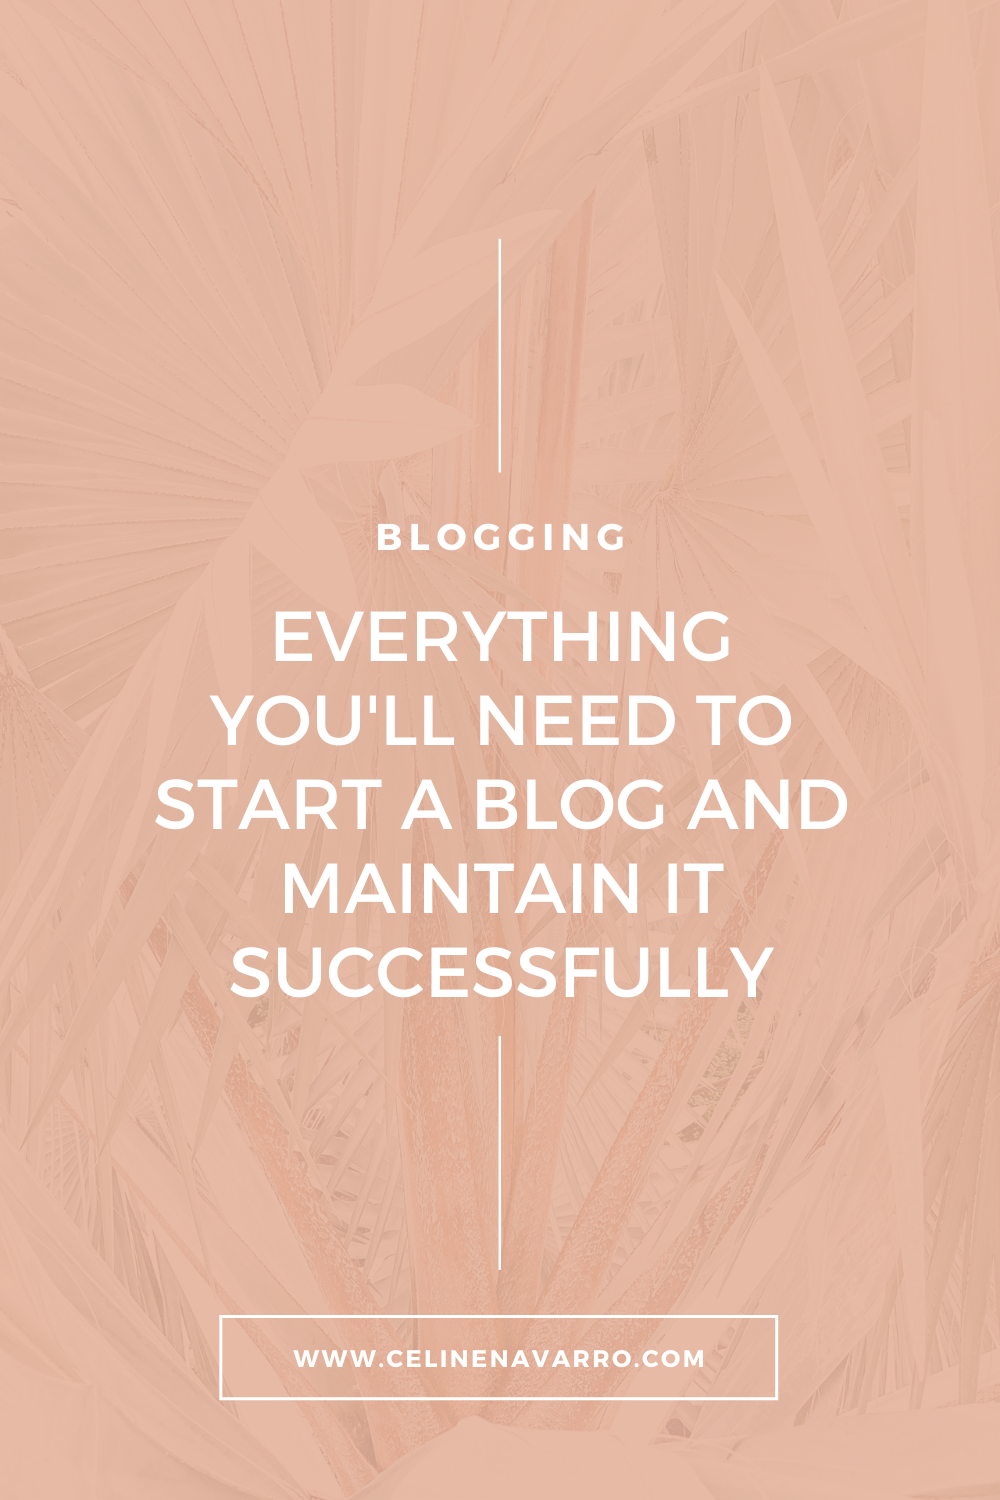 EVERYTHING YOU'LL NEED TO START A BLOG AND MAINTAIN IT SUCCESSFULLY